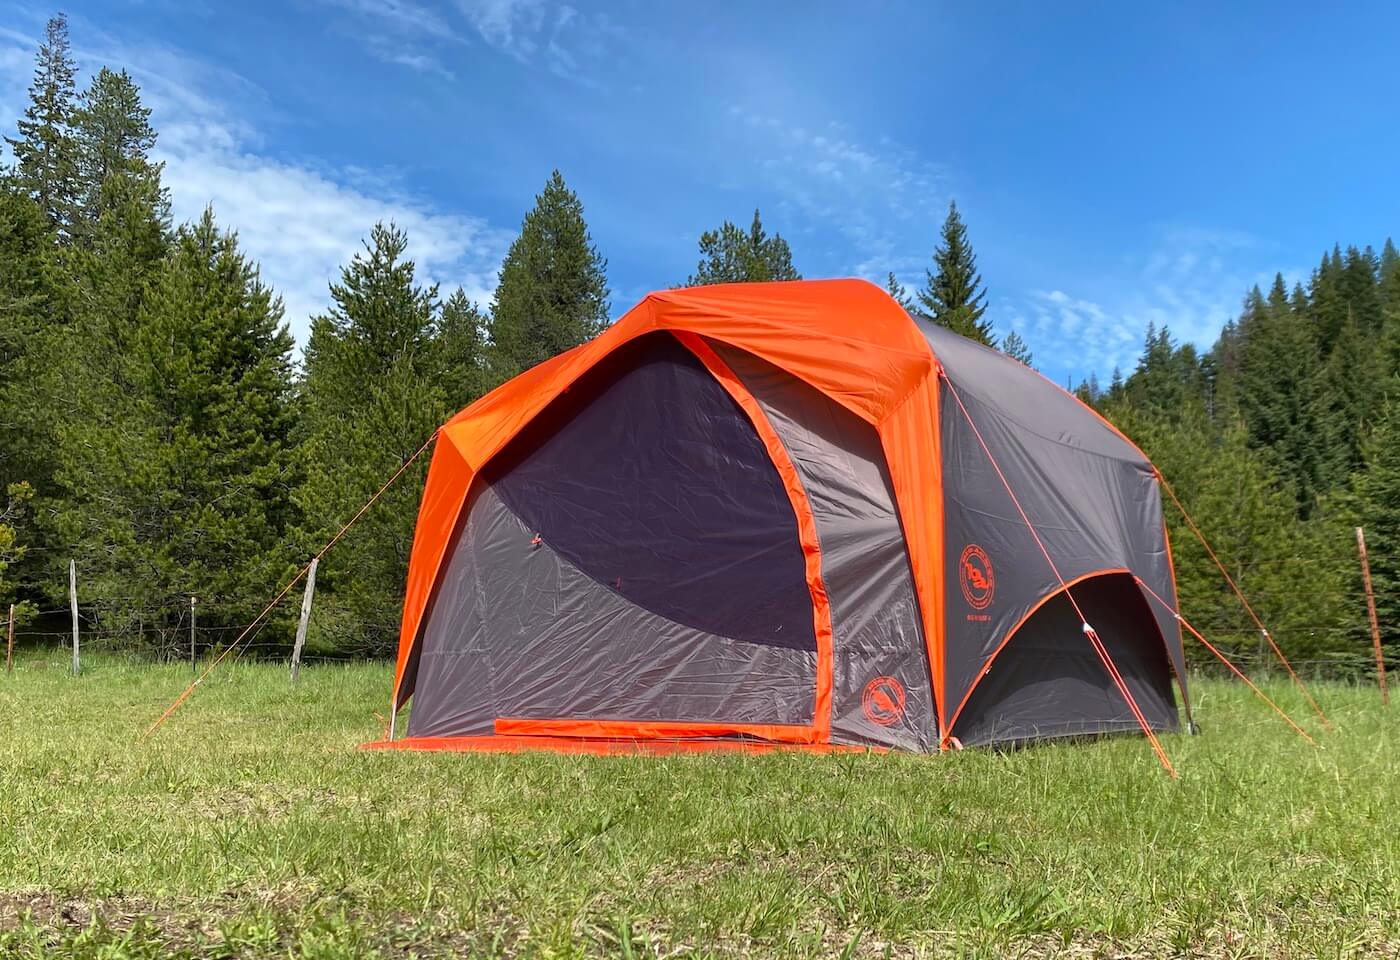 This photo shows the Big Agnes Big House 4 Tent set up at a dispersed camping spot for testing and review.